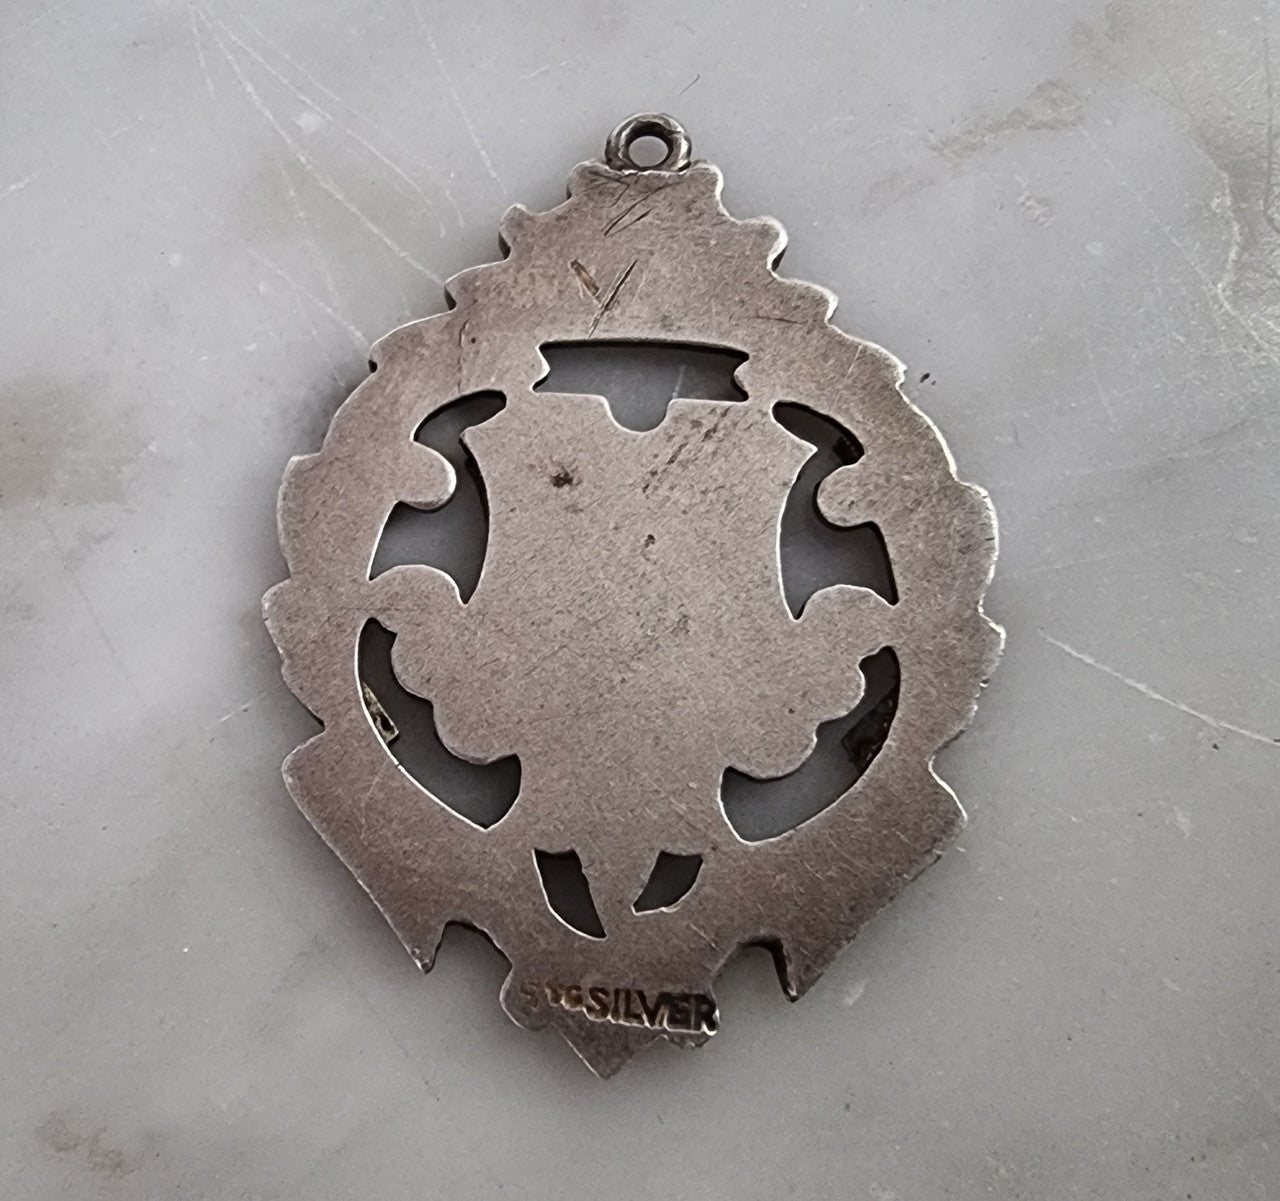 Antique Sterling Silver Fob Pendant